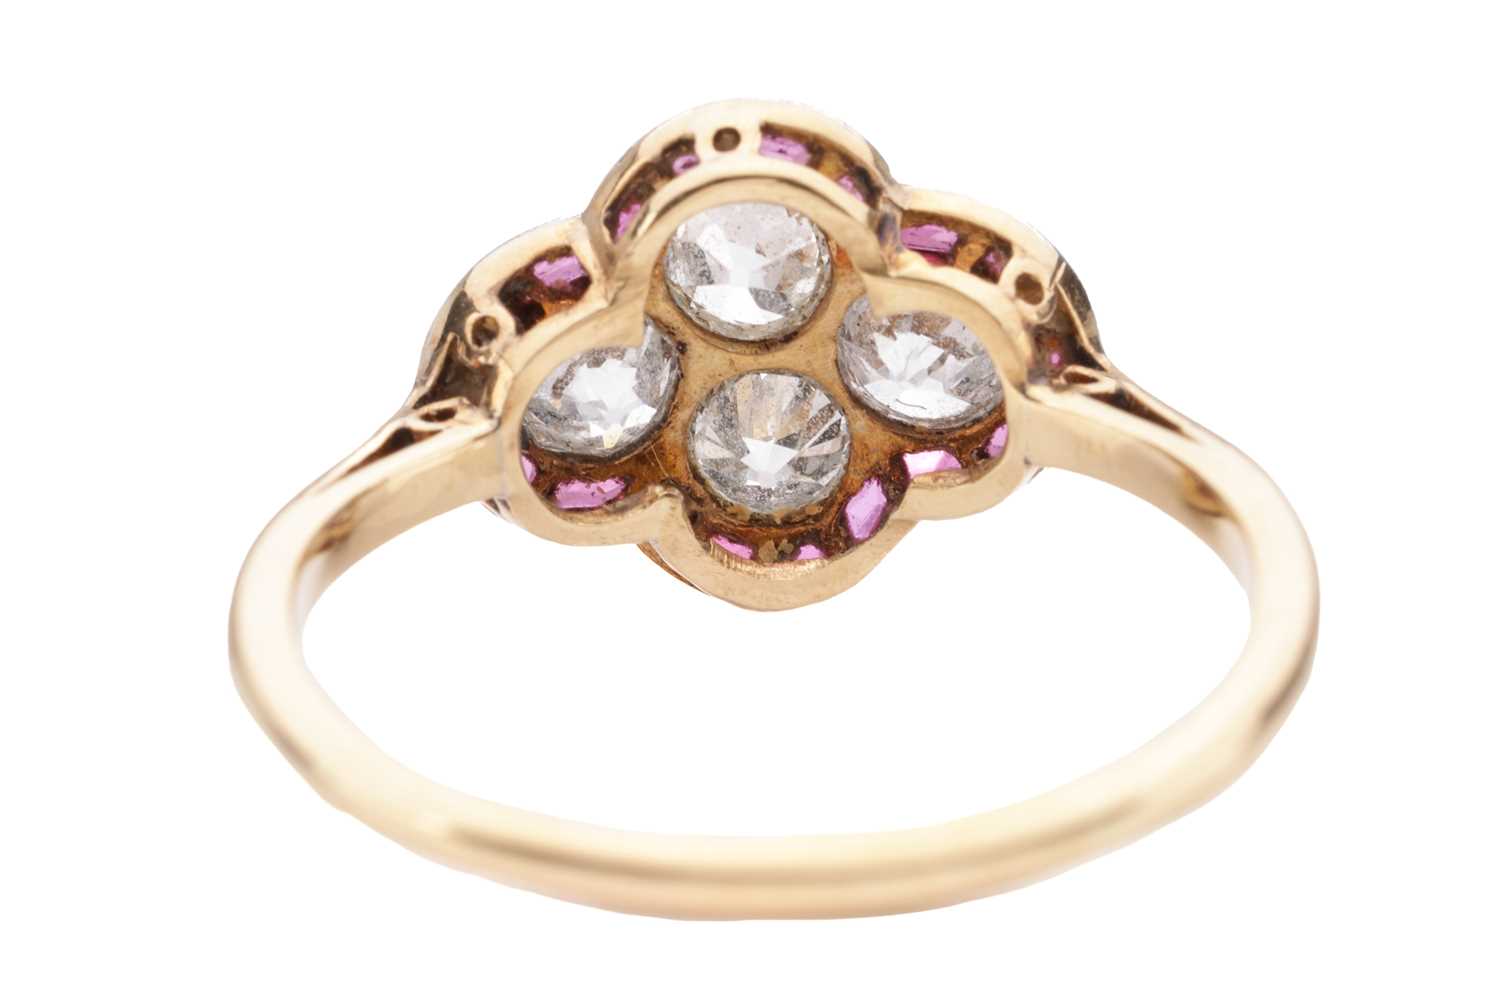 An Art Deco diamond and ruby quatrefoil ring, the panel is constructed by four old-cut diamonds with - Image 3 of 4